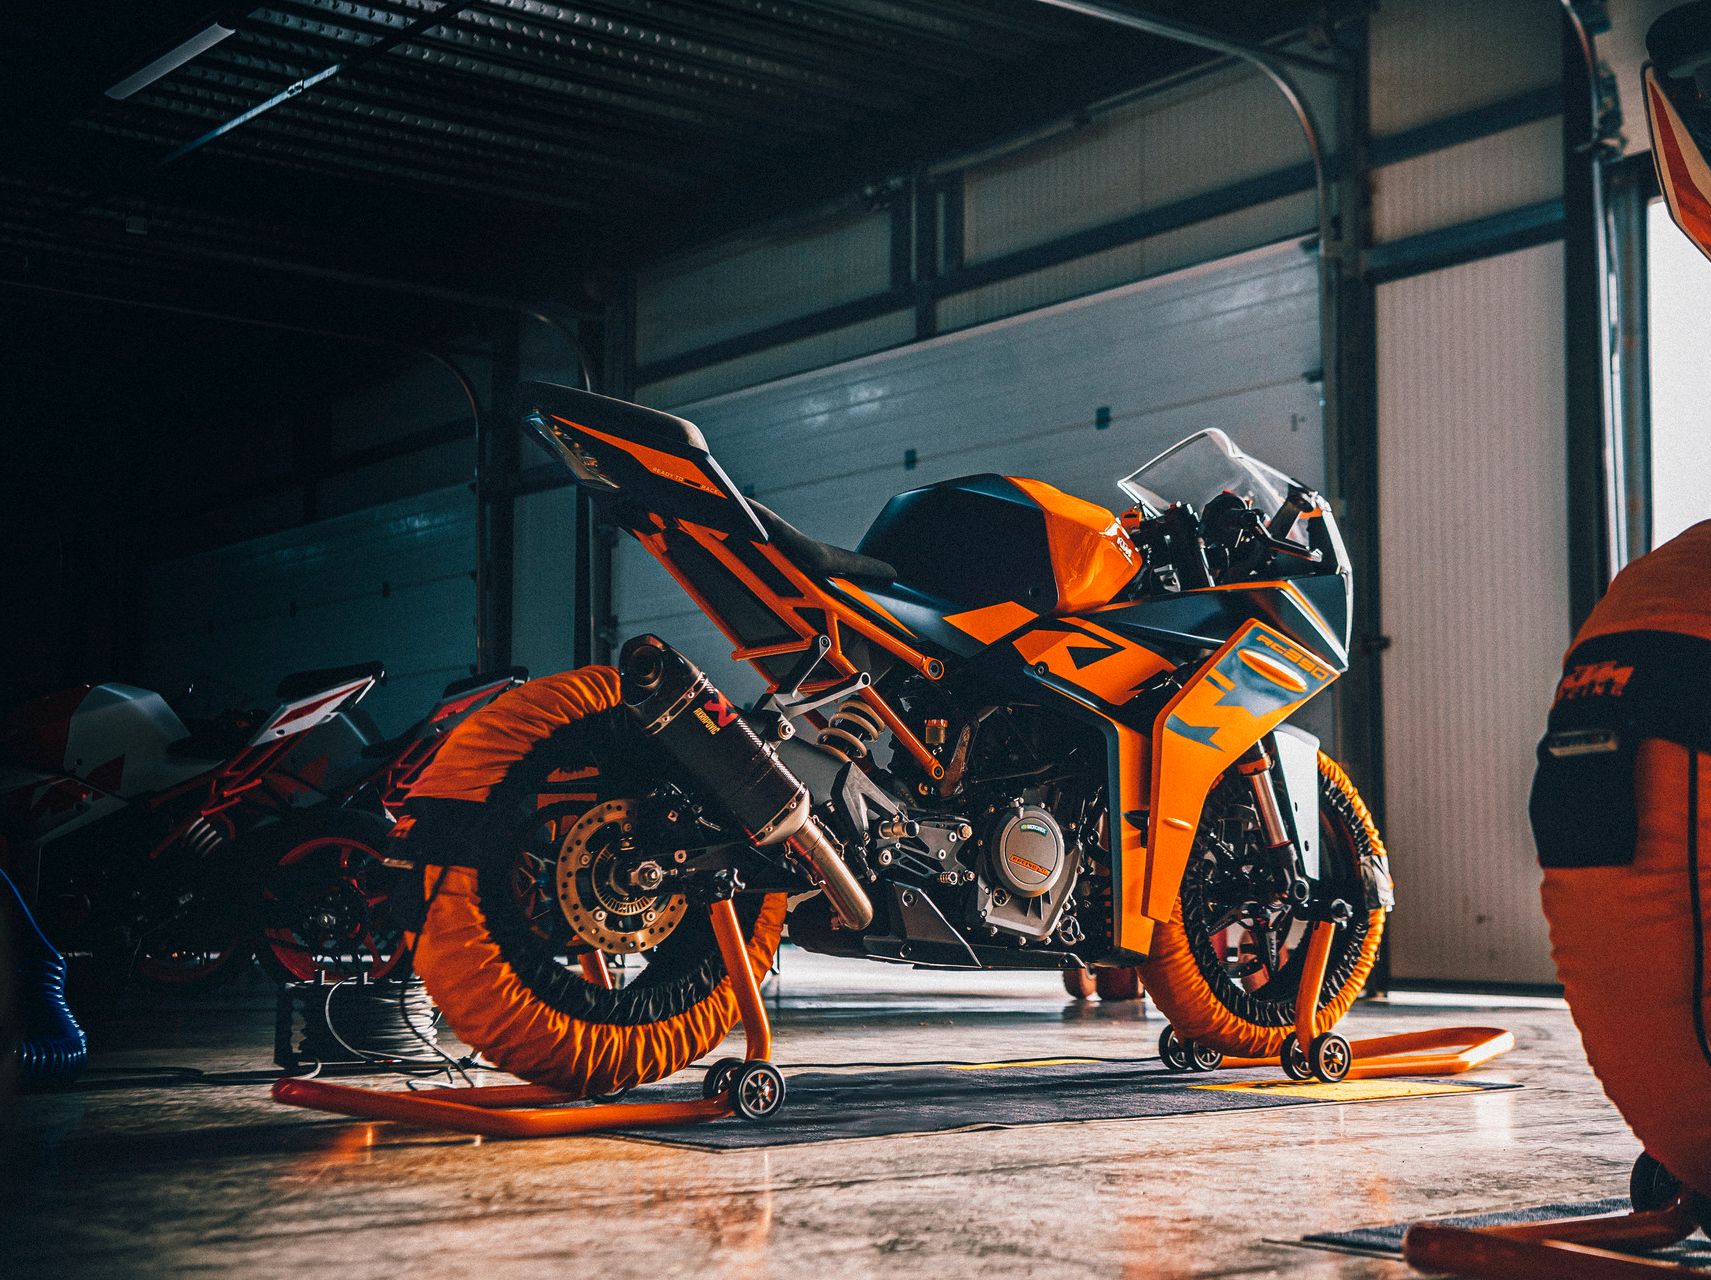 KTM Updates Its RC Range Of Sportbikes For 2023